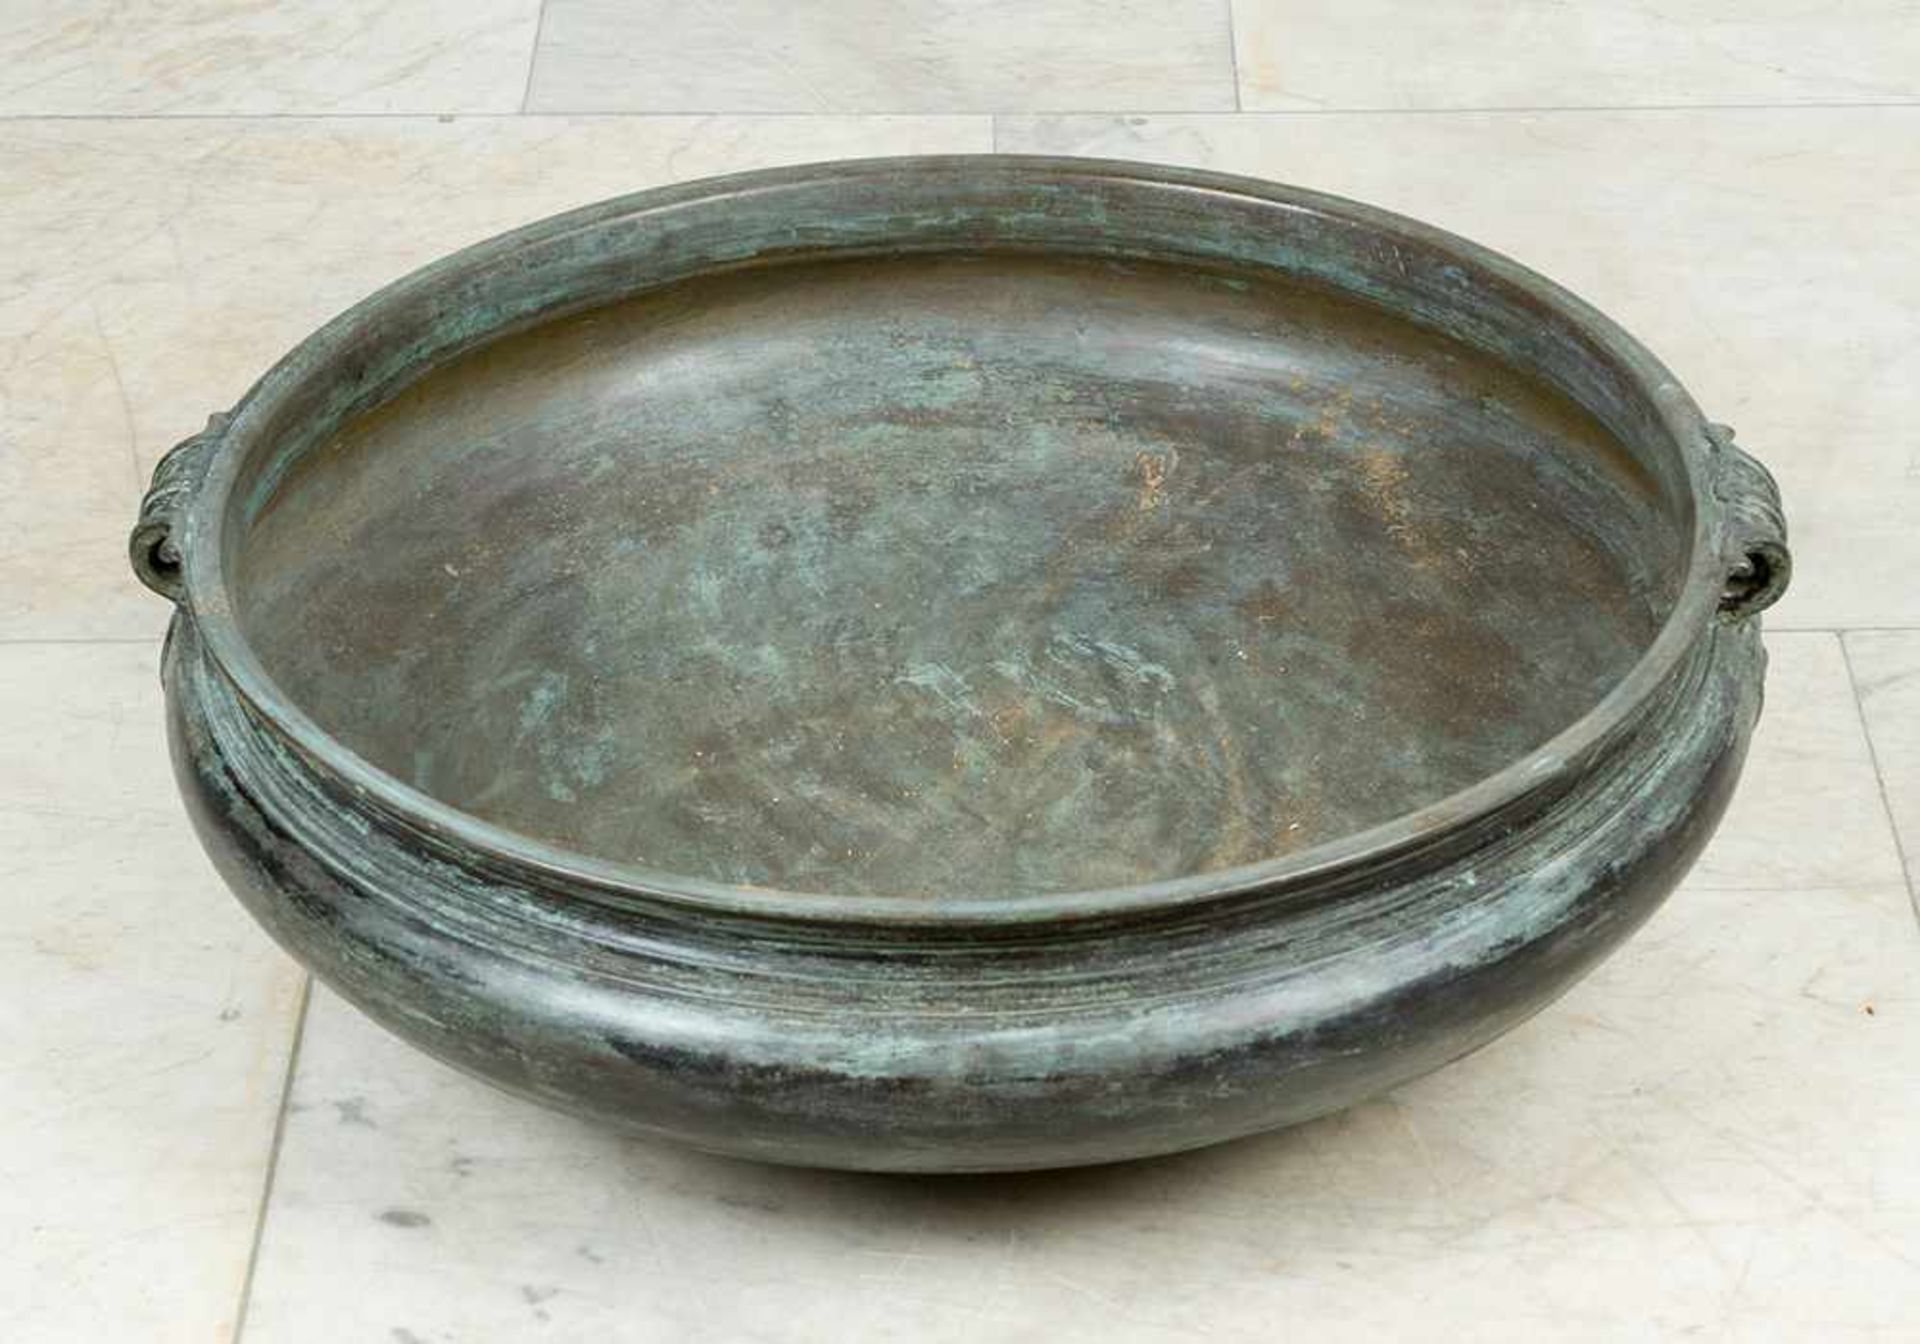 Large bronze bowl. Round bow shape with thinner neck and two open work side-grips with